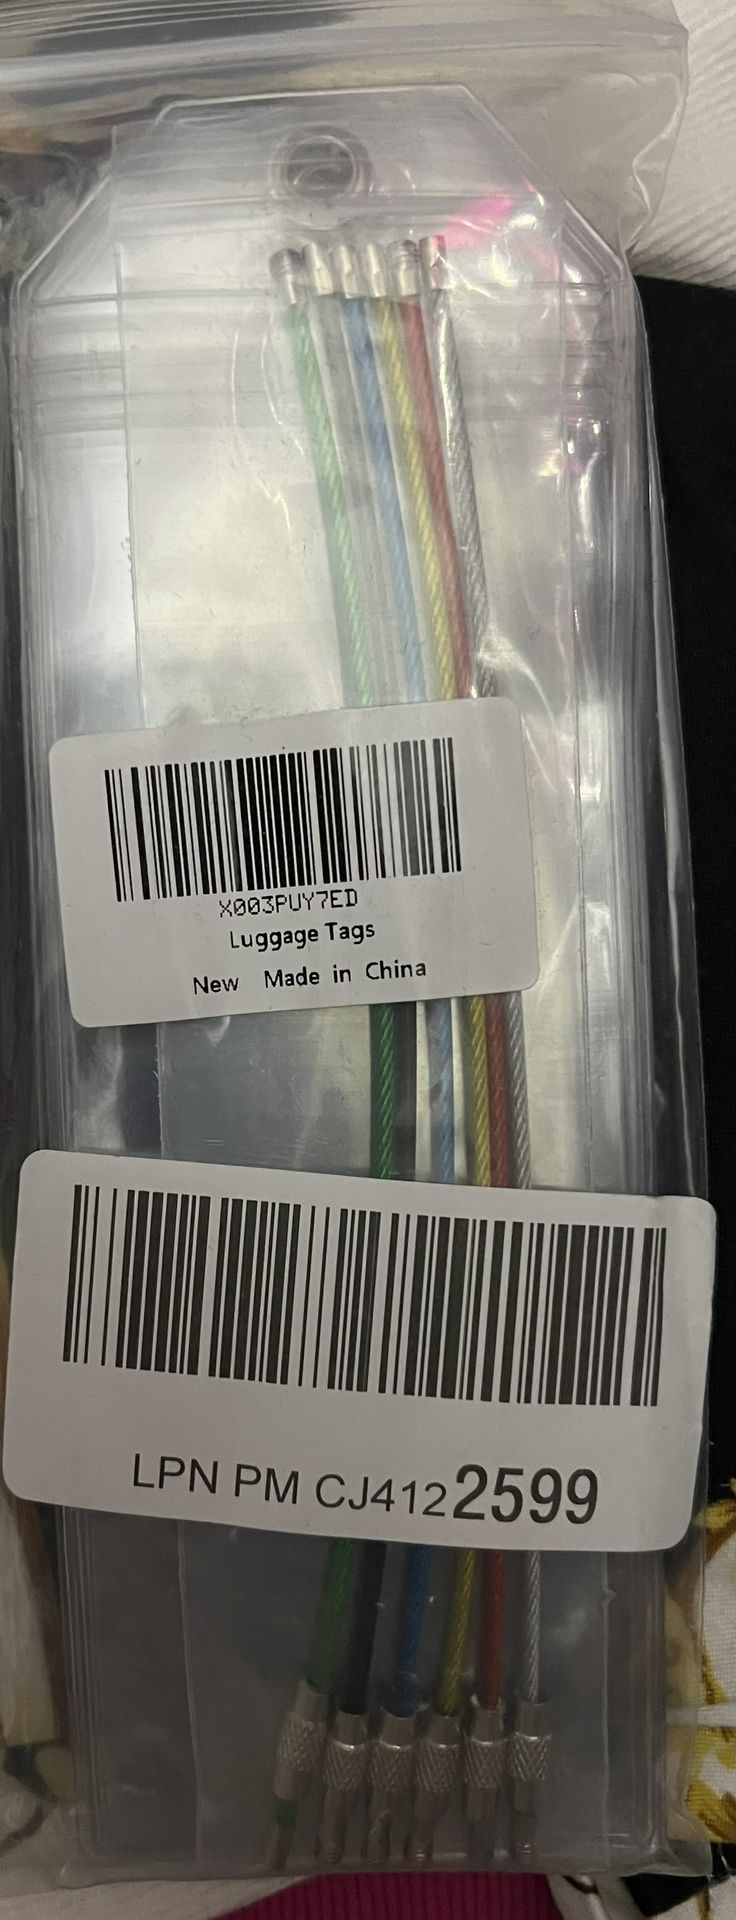 Clear Luggage Tags (used For Cruise)